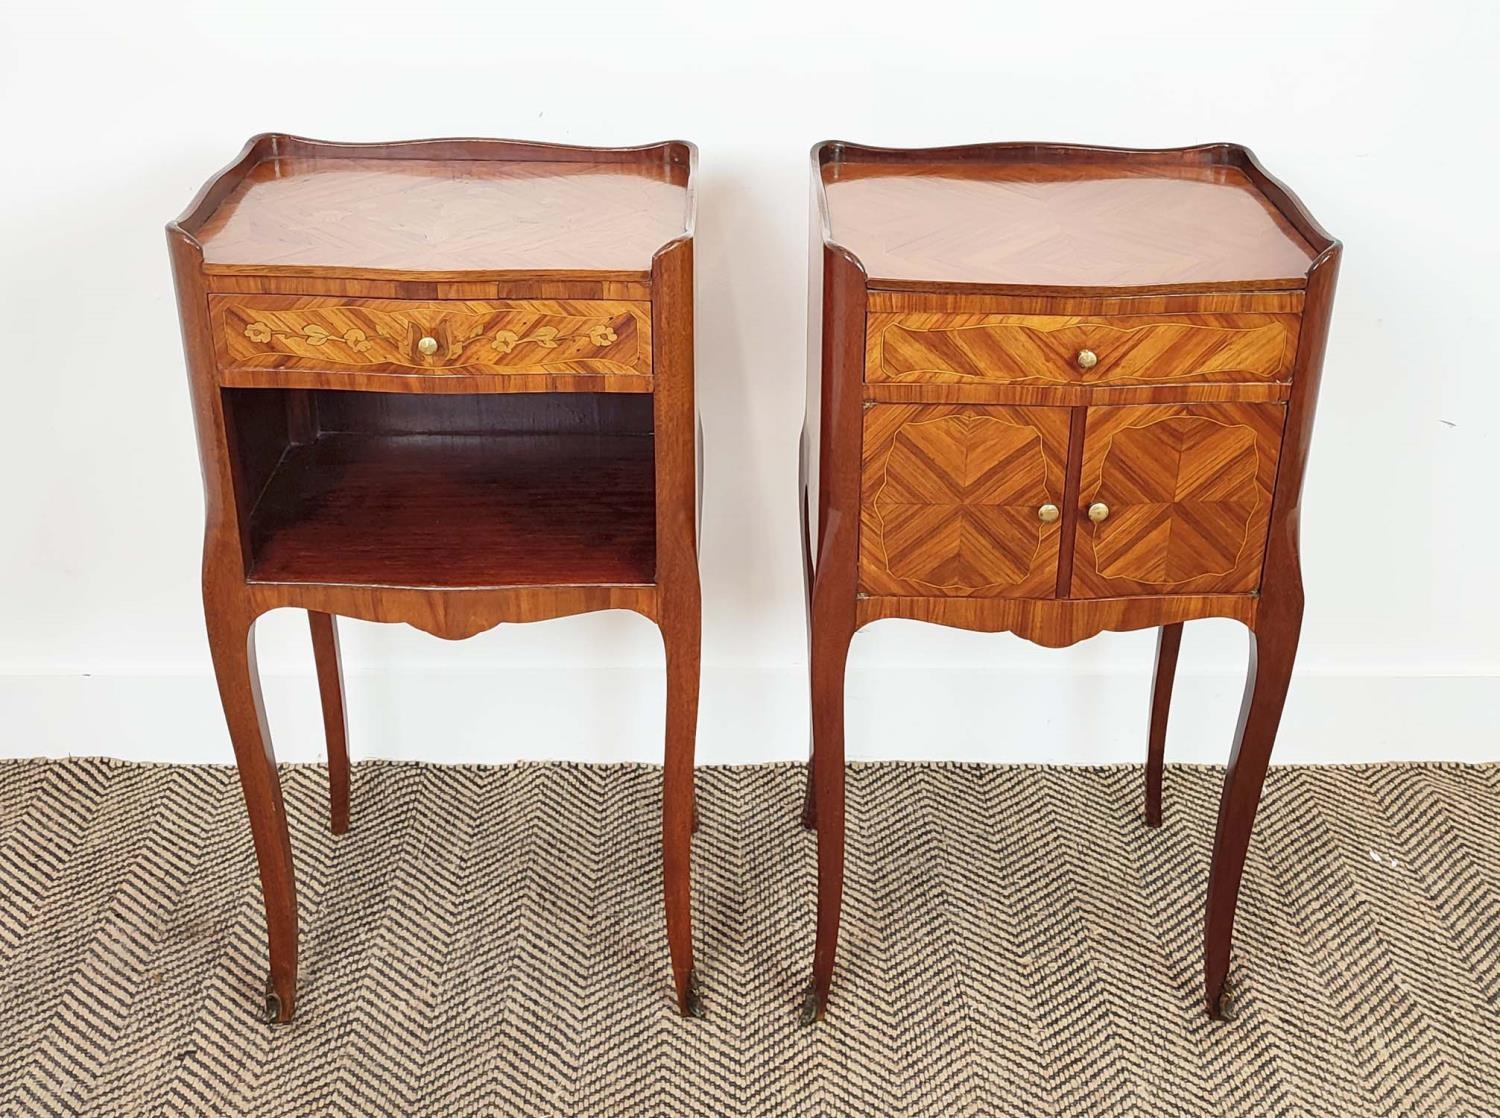 BEDSIDE CABINETS, a matched pair, Louis XV style tulipwood and inlaid, one with marquetry and